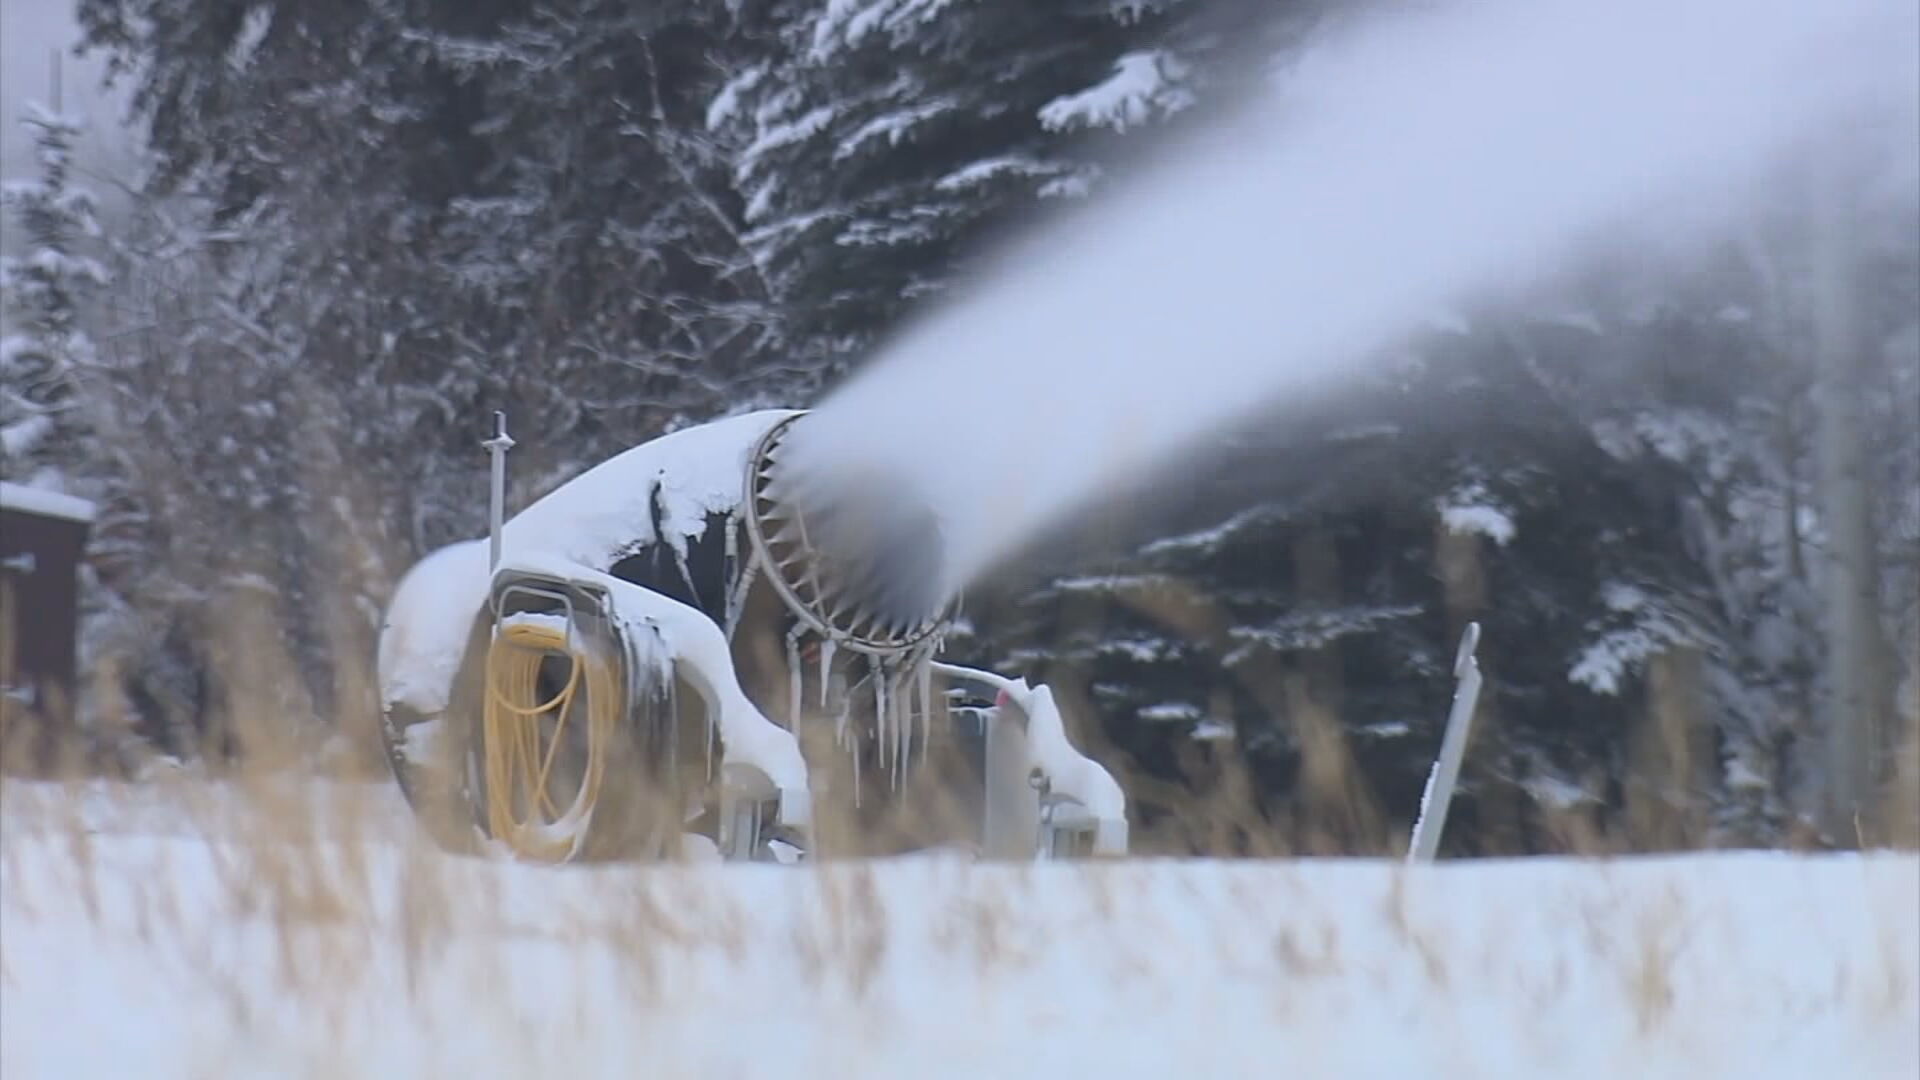 Amid Drought, Snowmaking Operations Statewide Use About 2.2 Billion Gallons Of Water, But It's Just A Drop In The Bucket Compared To Other Industries - CBS Denver